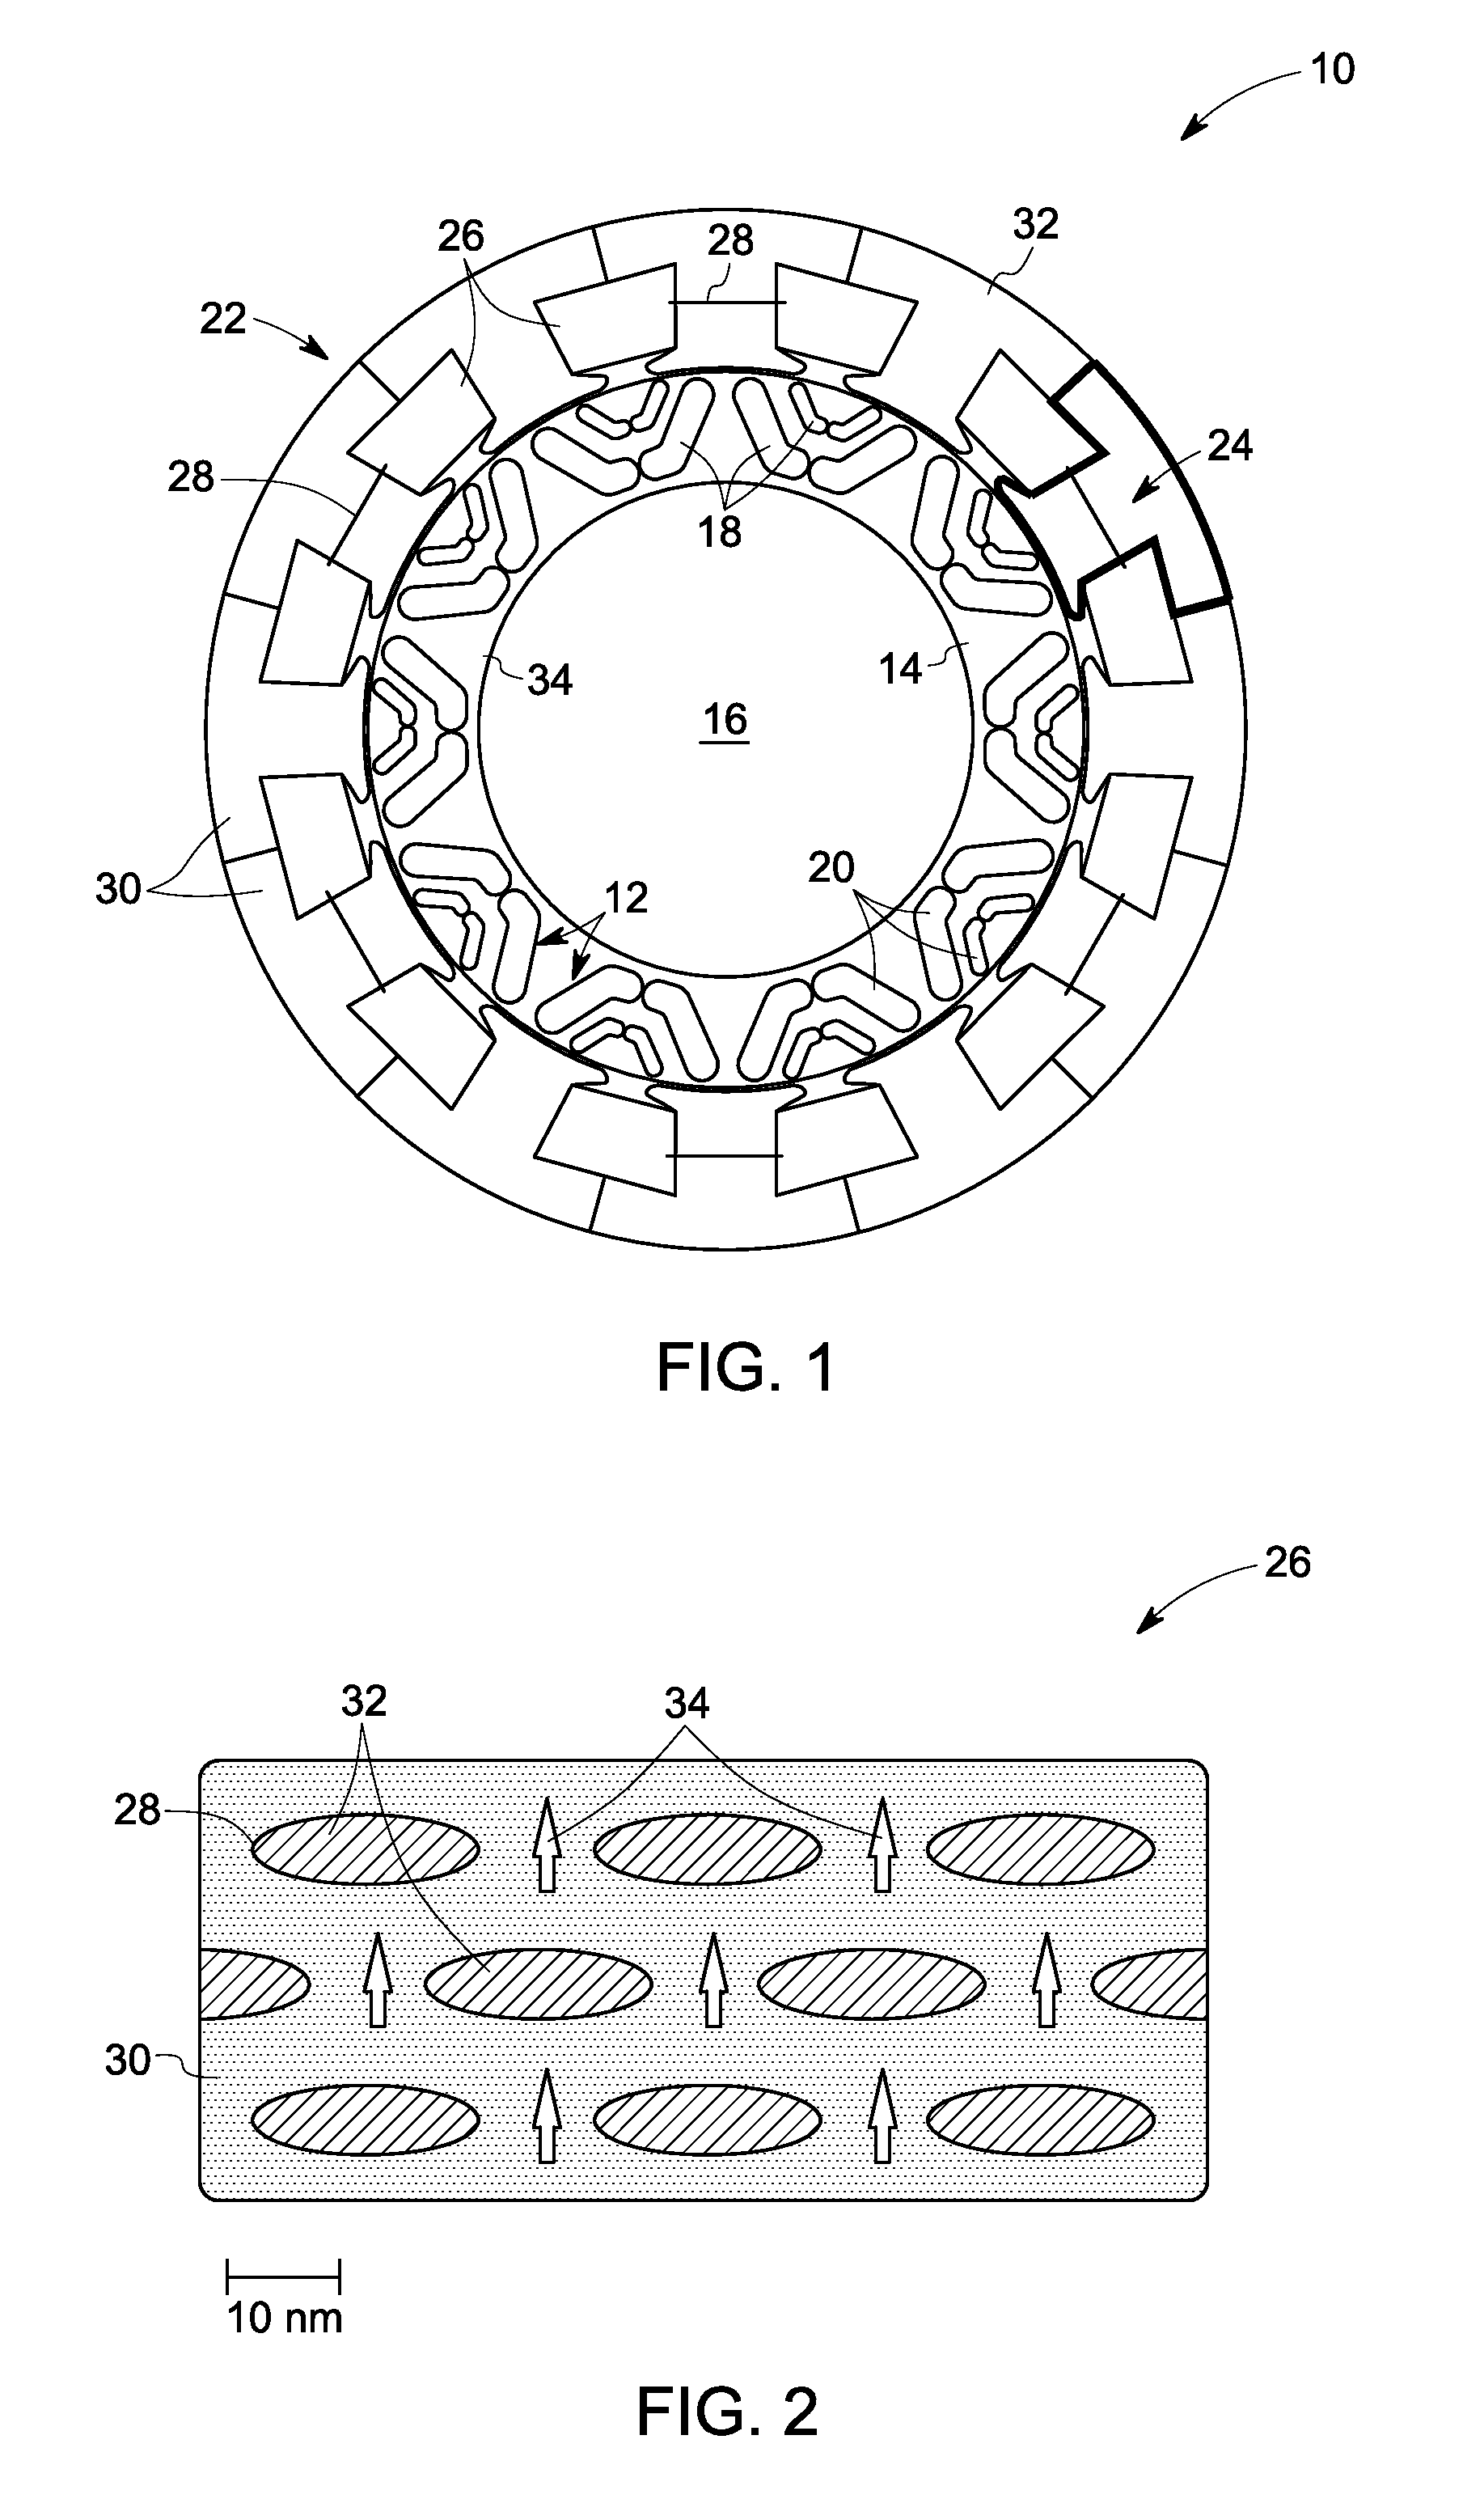 Nanocomposite permanent magnets and methods of making the same